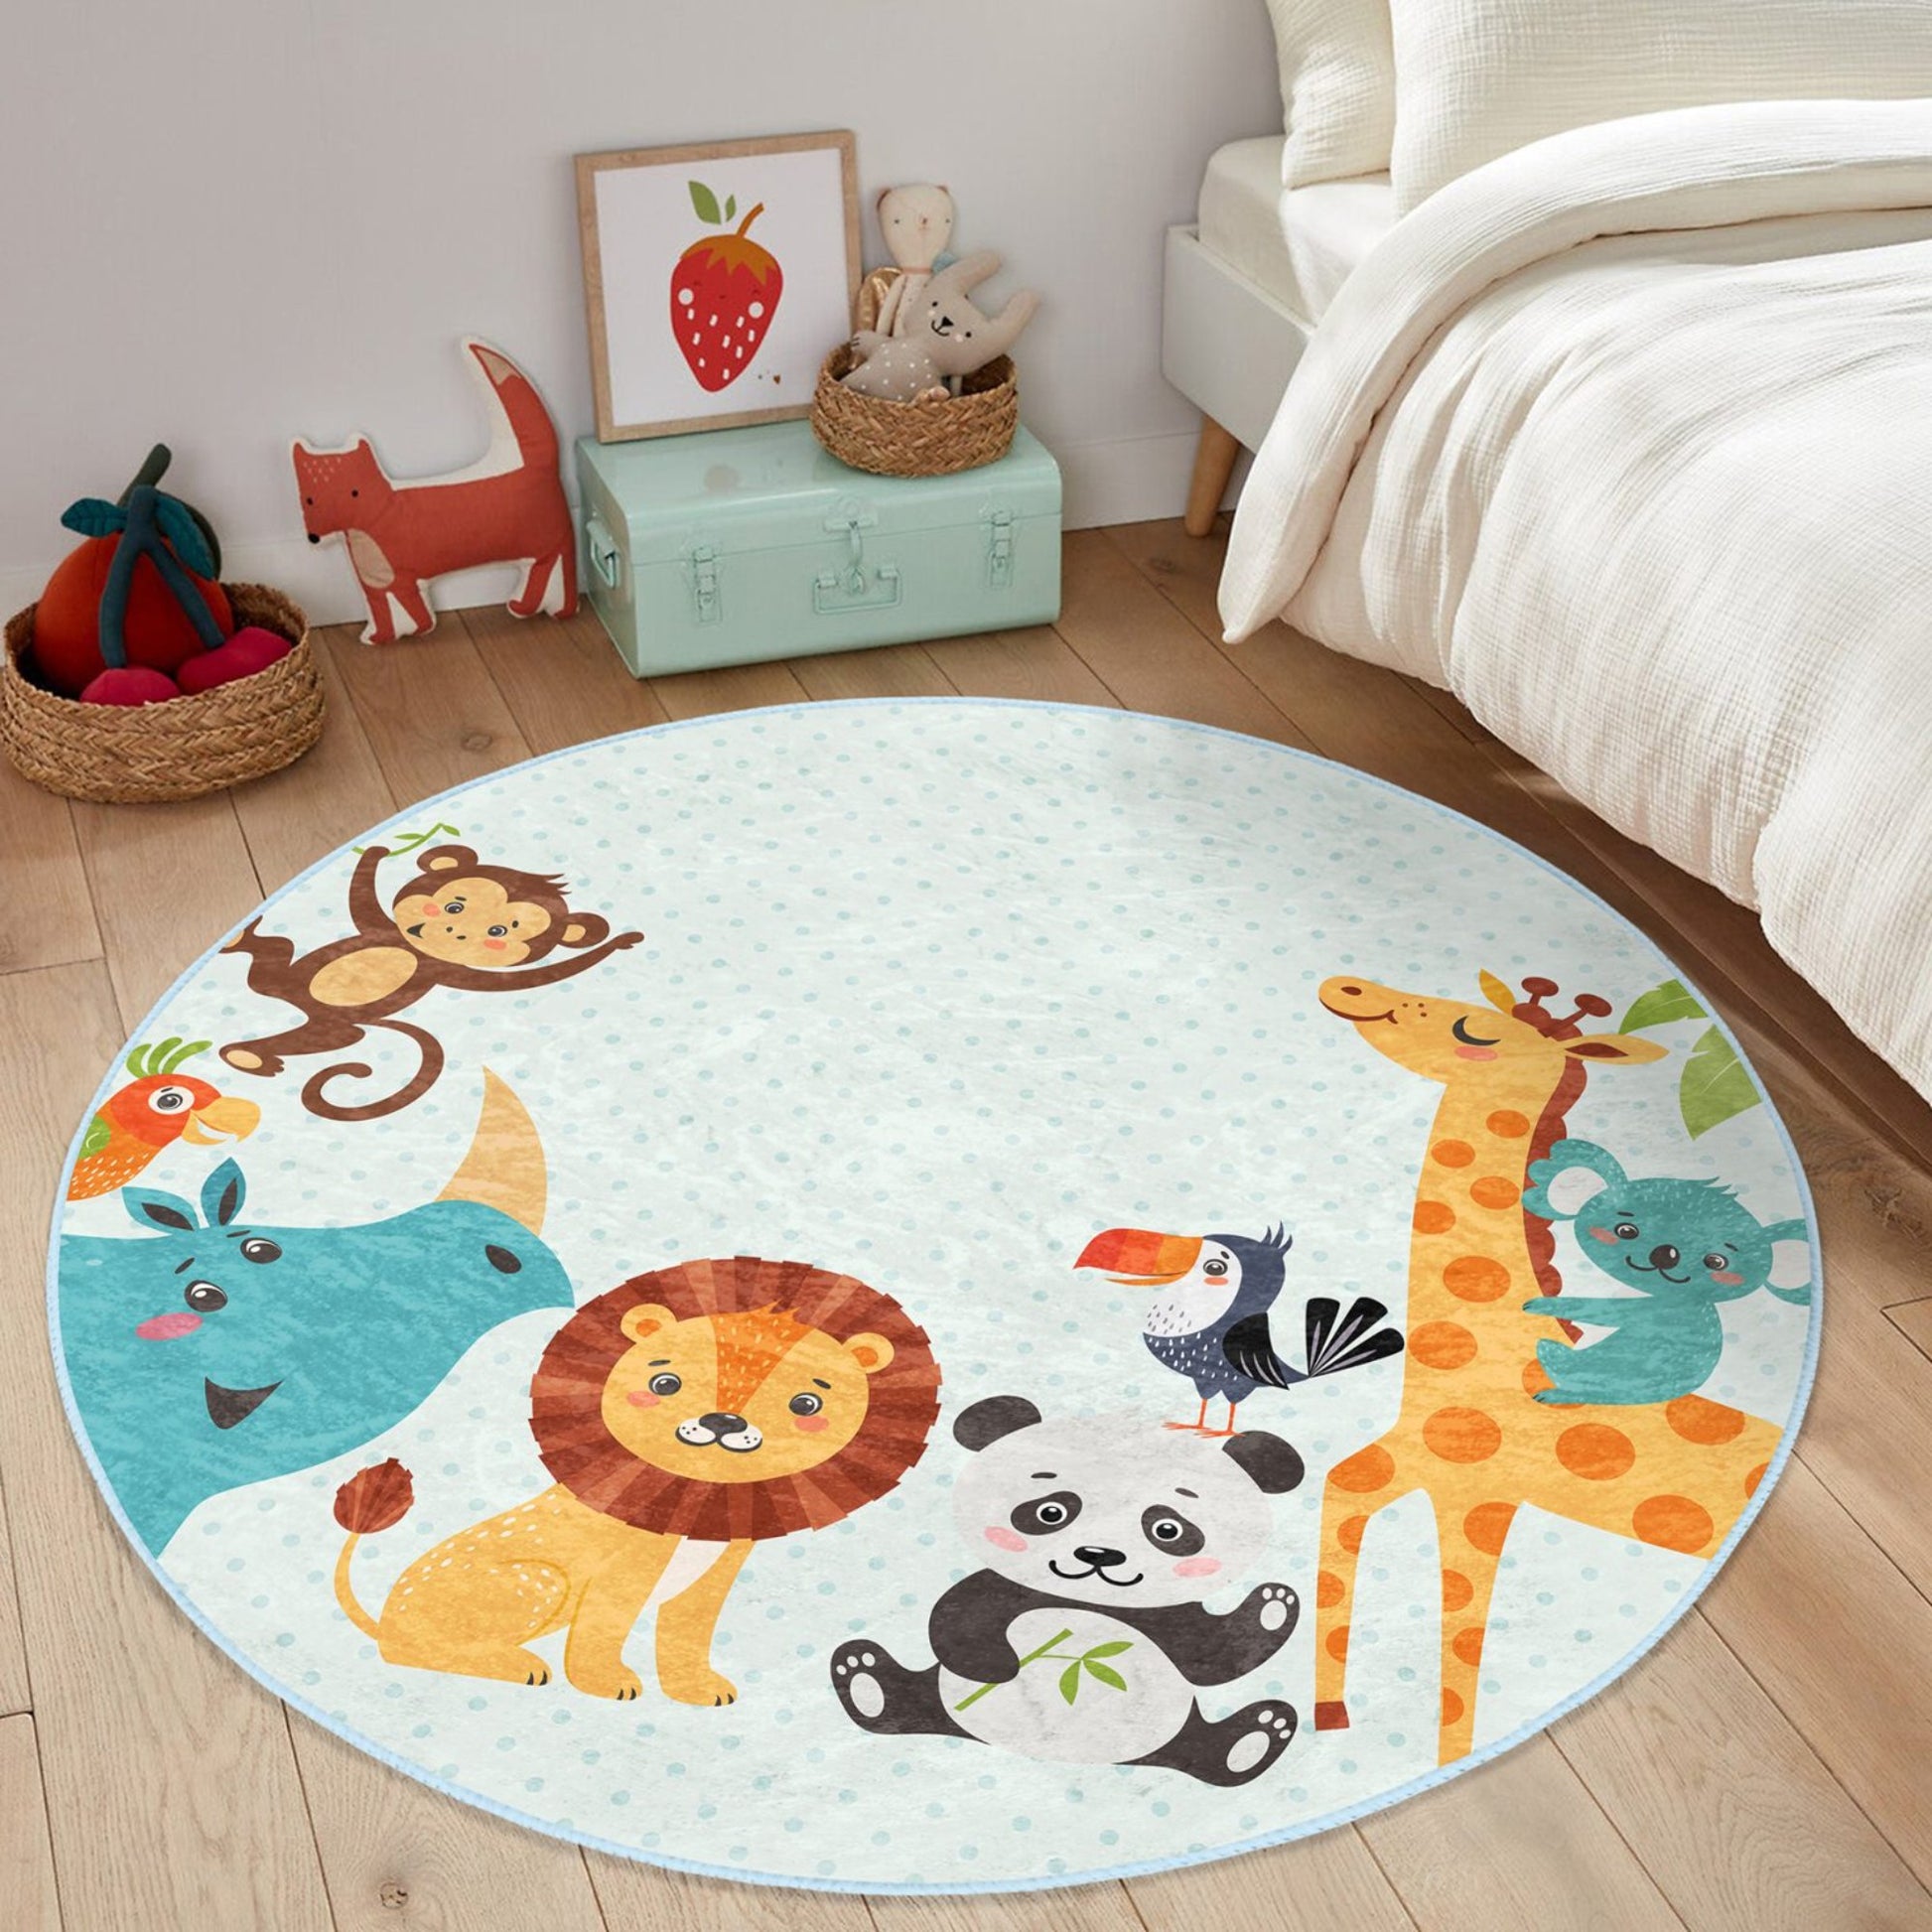 Round Safari Animals Patterned Floor Rug - Charming Accent